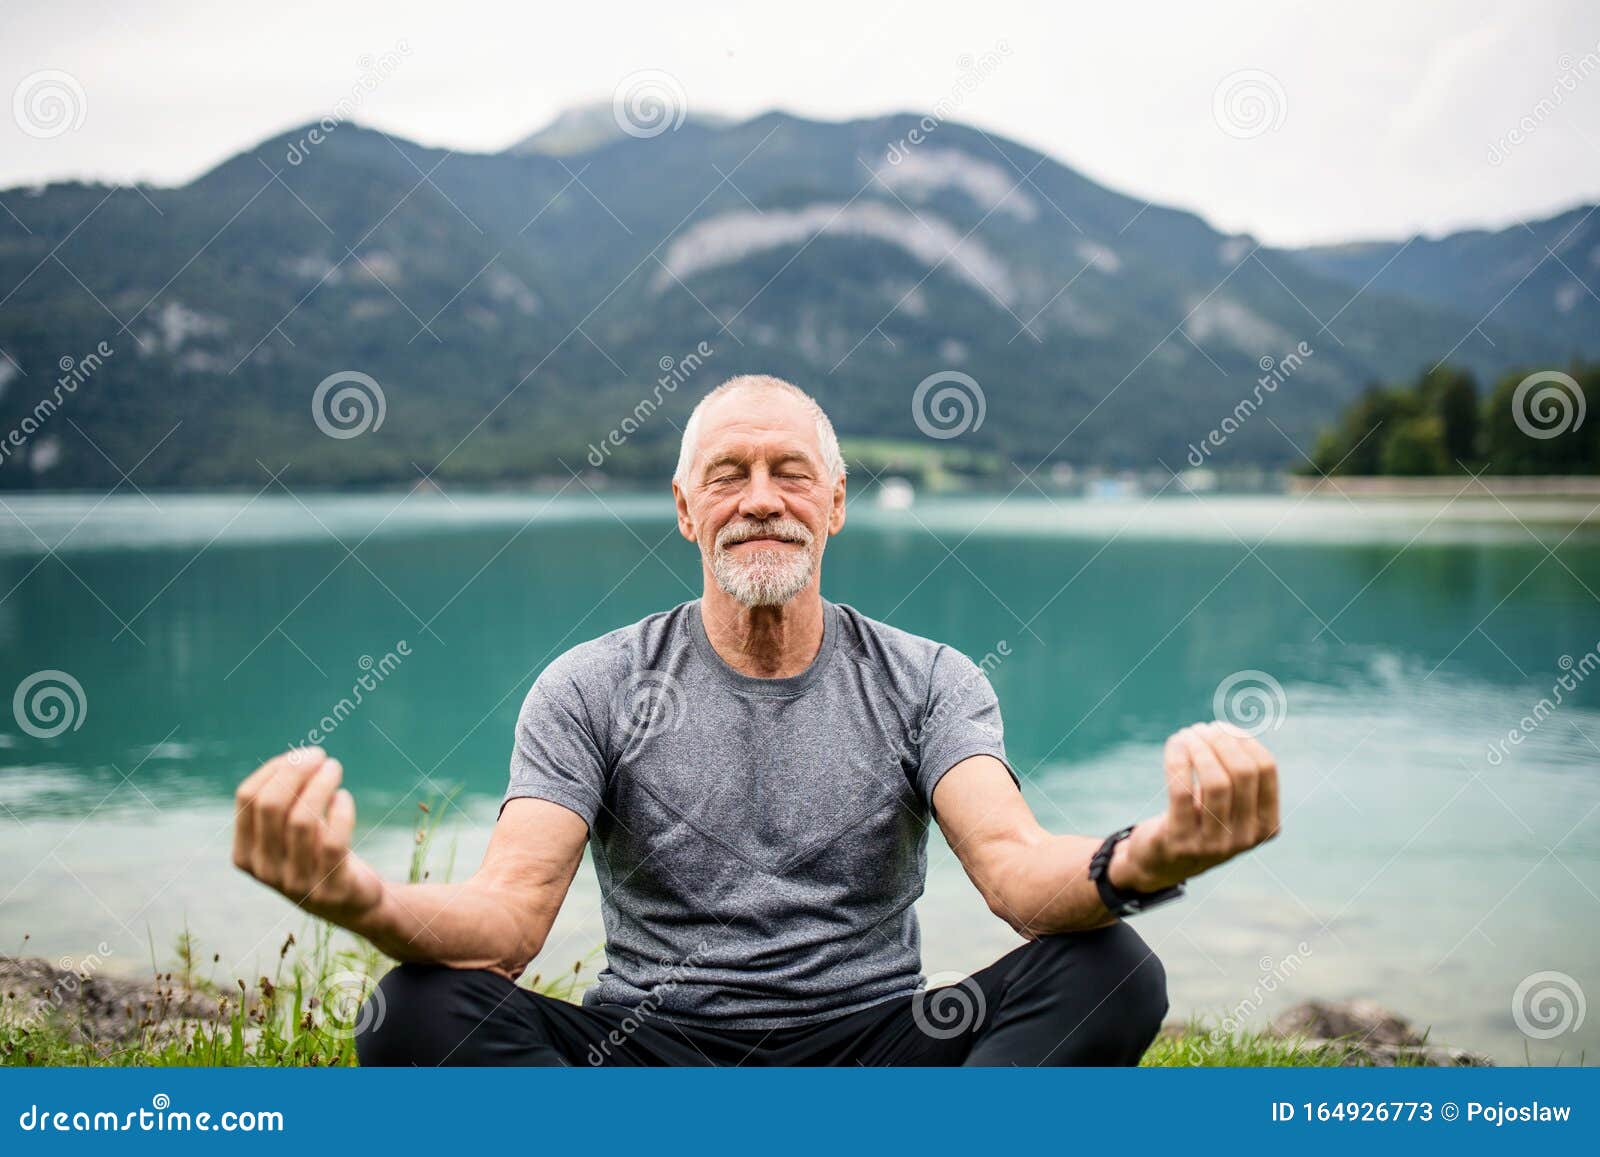 a senior man pensioner sitting by lake in nature, doing yoga exercise.